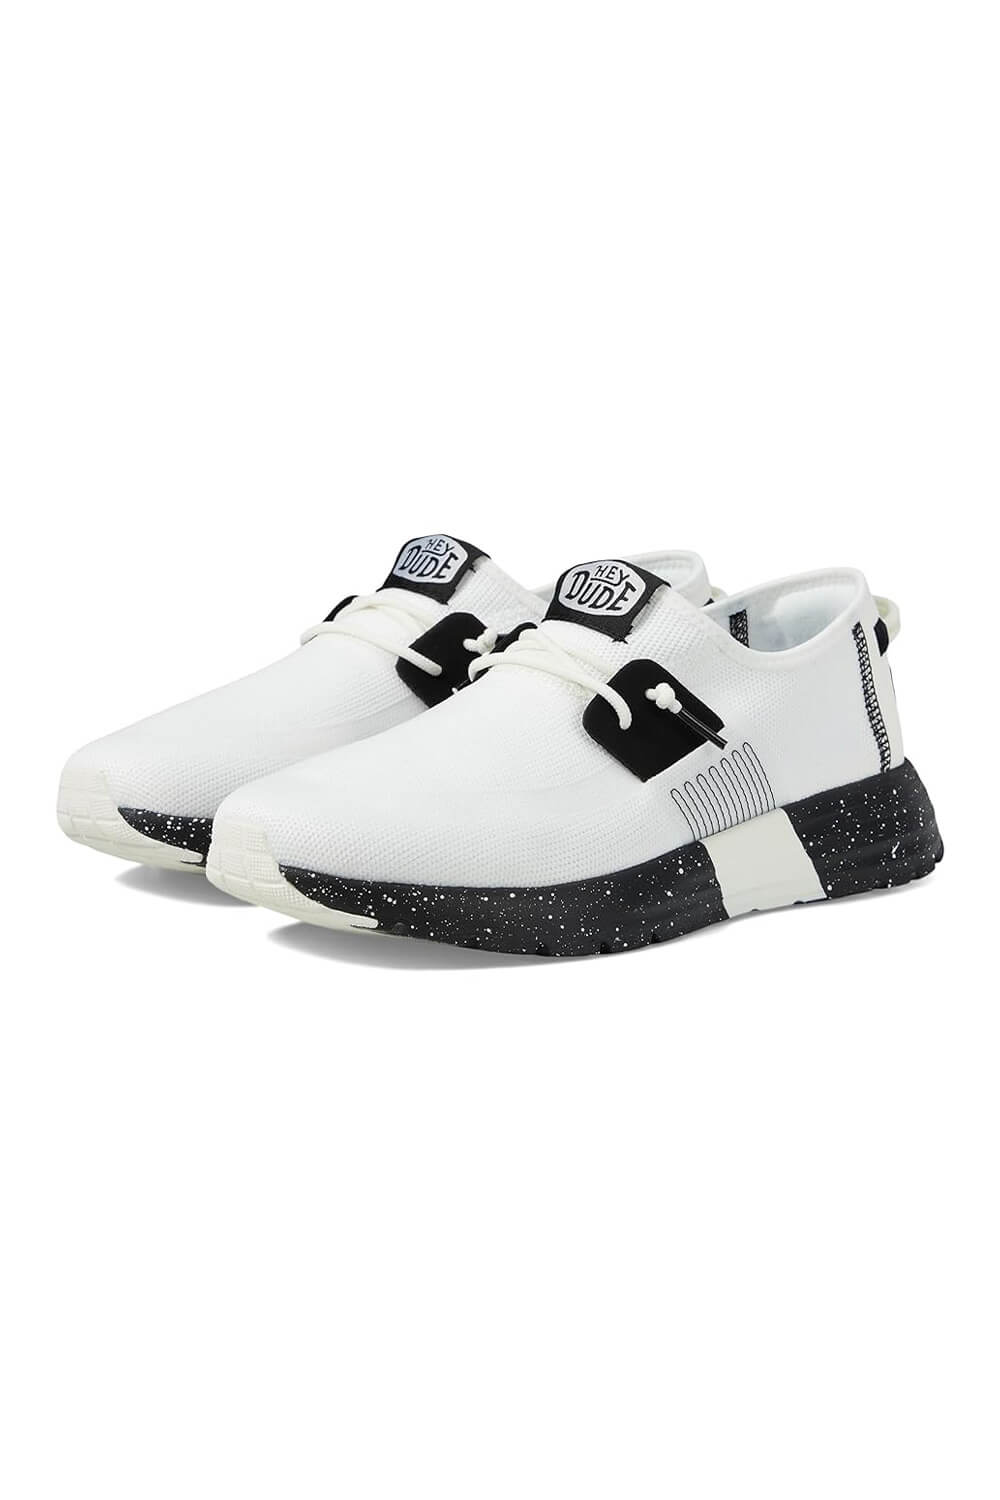 HEYDUDE Men's Sirocco Sport Mode Shoes in Black/White | 40714-103 